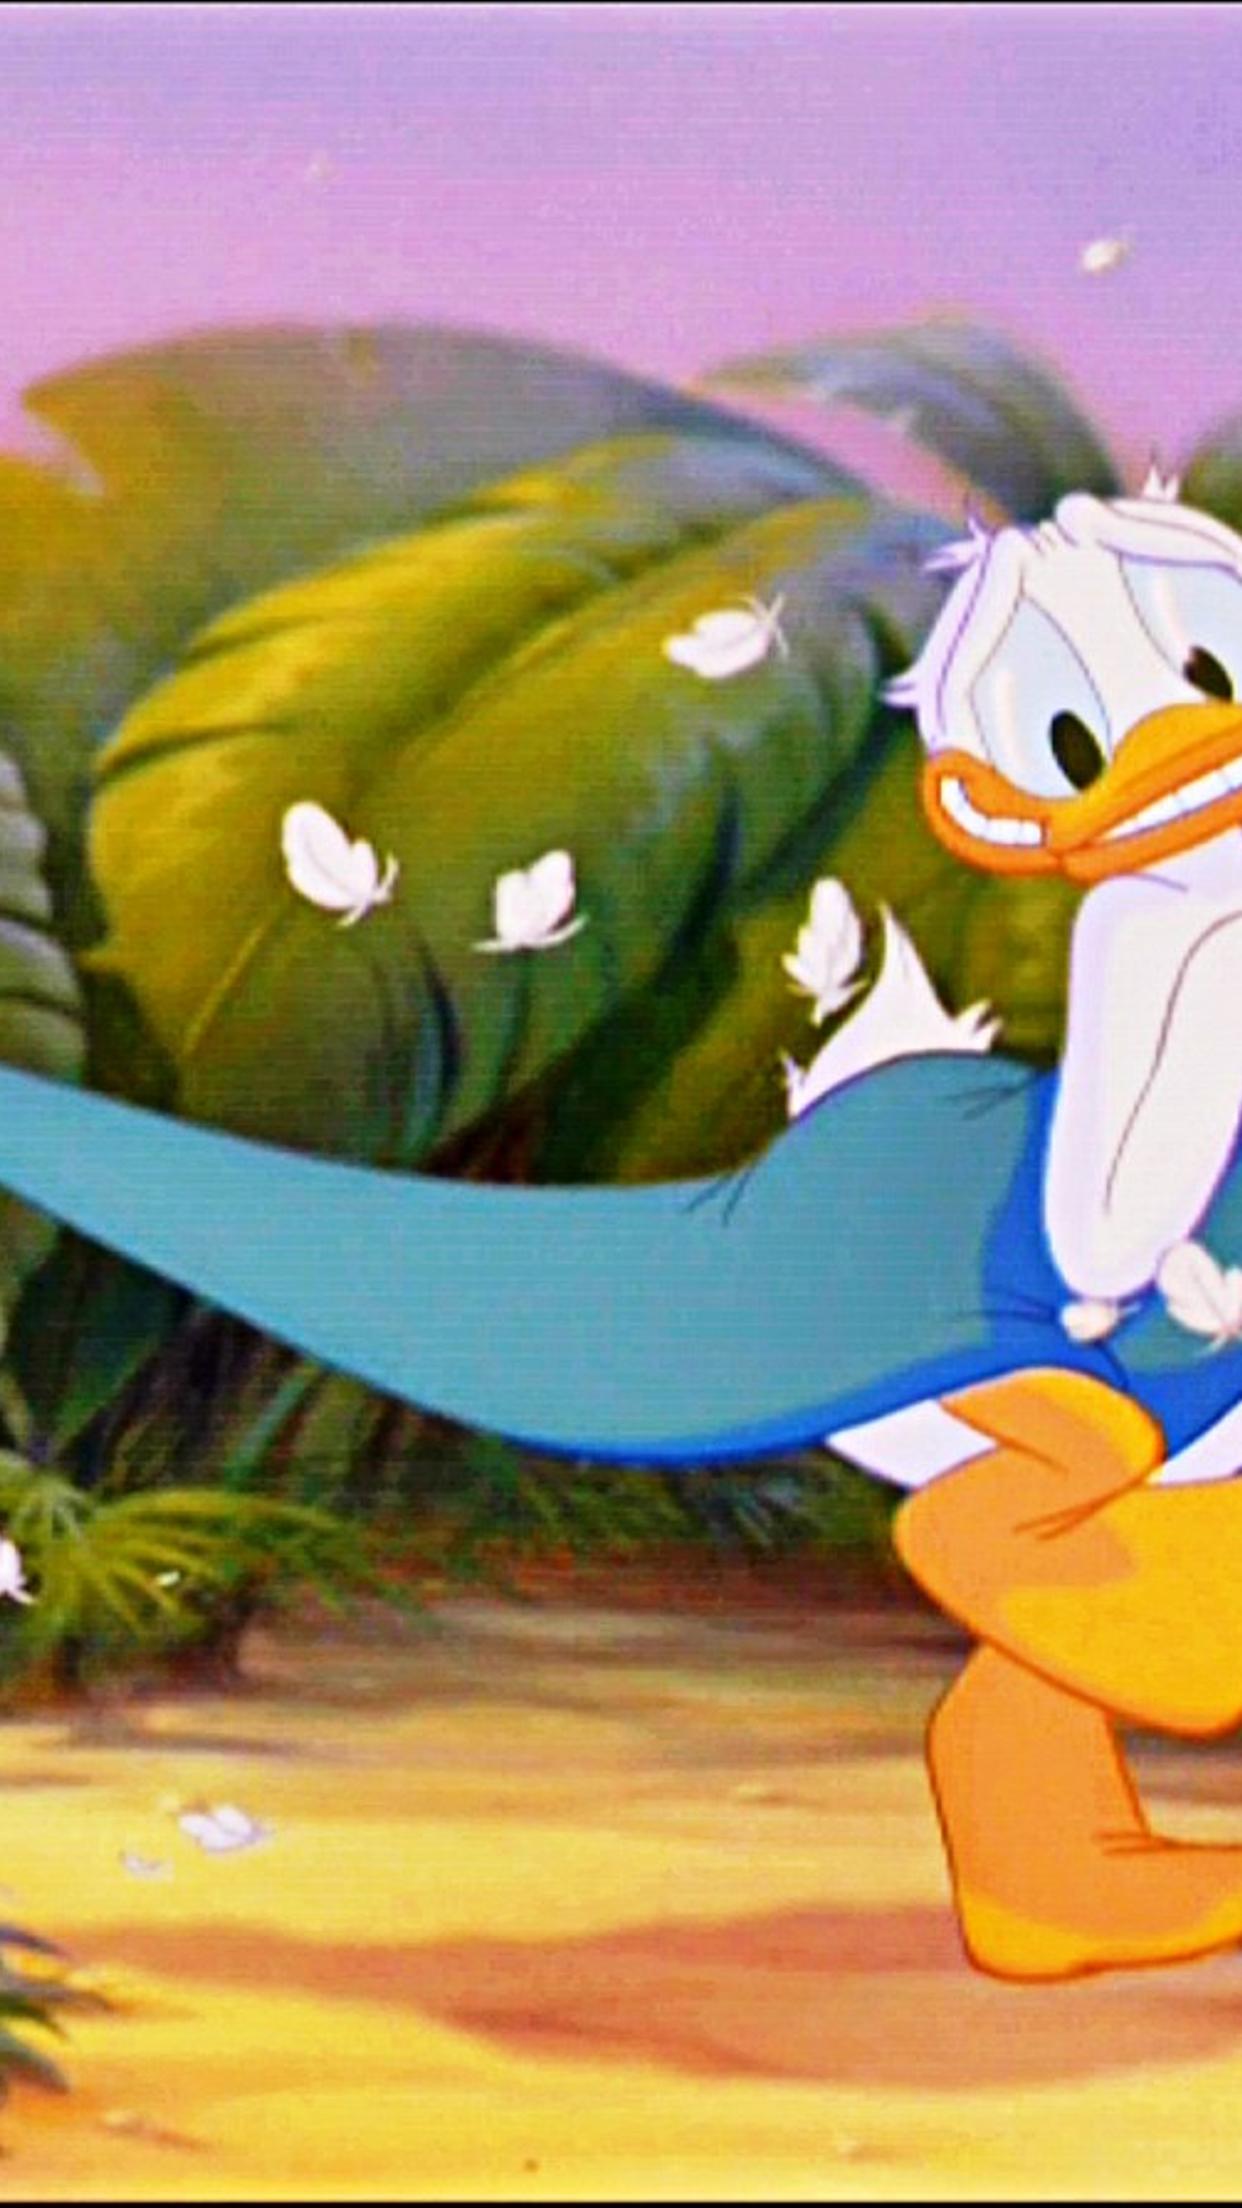 Donald duck wallpaper for android phone | the art mad wallpapers - Duck